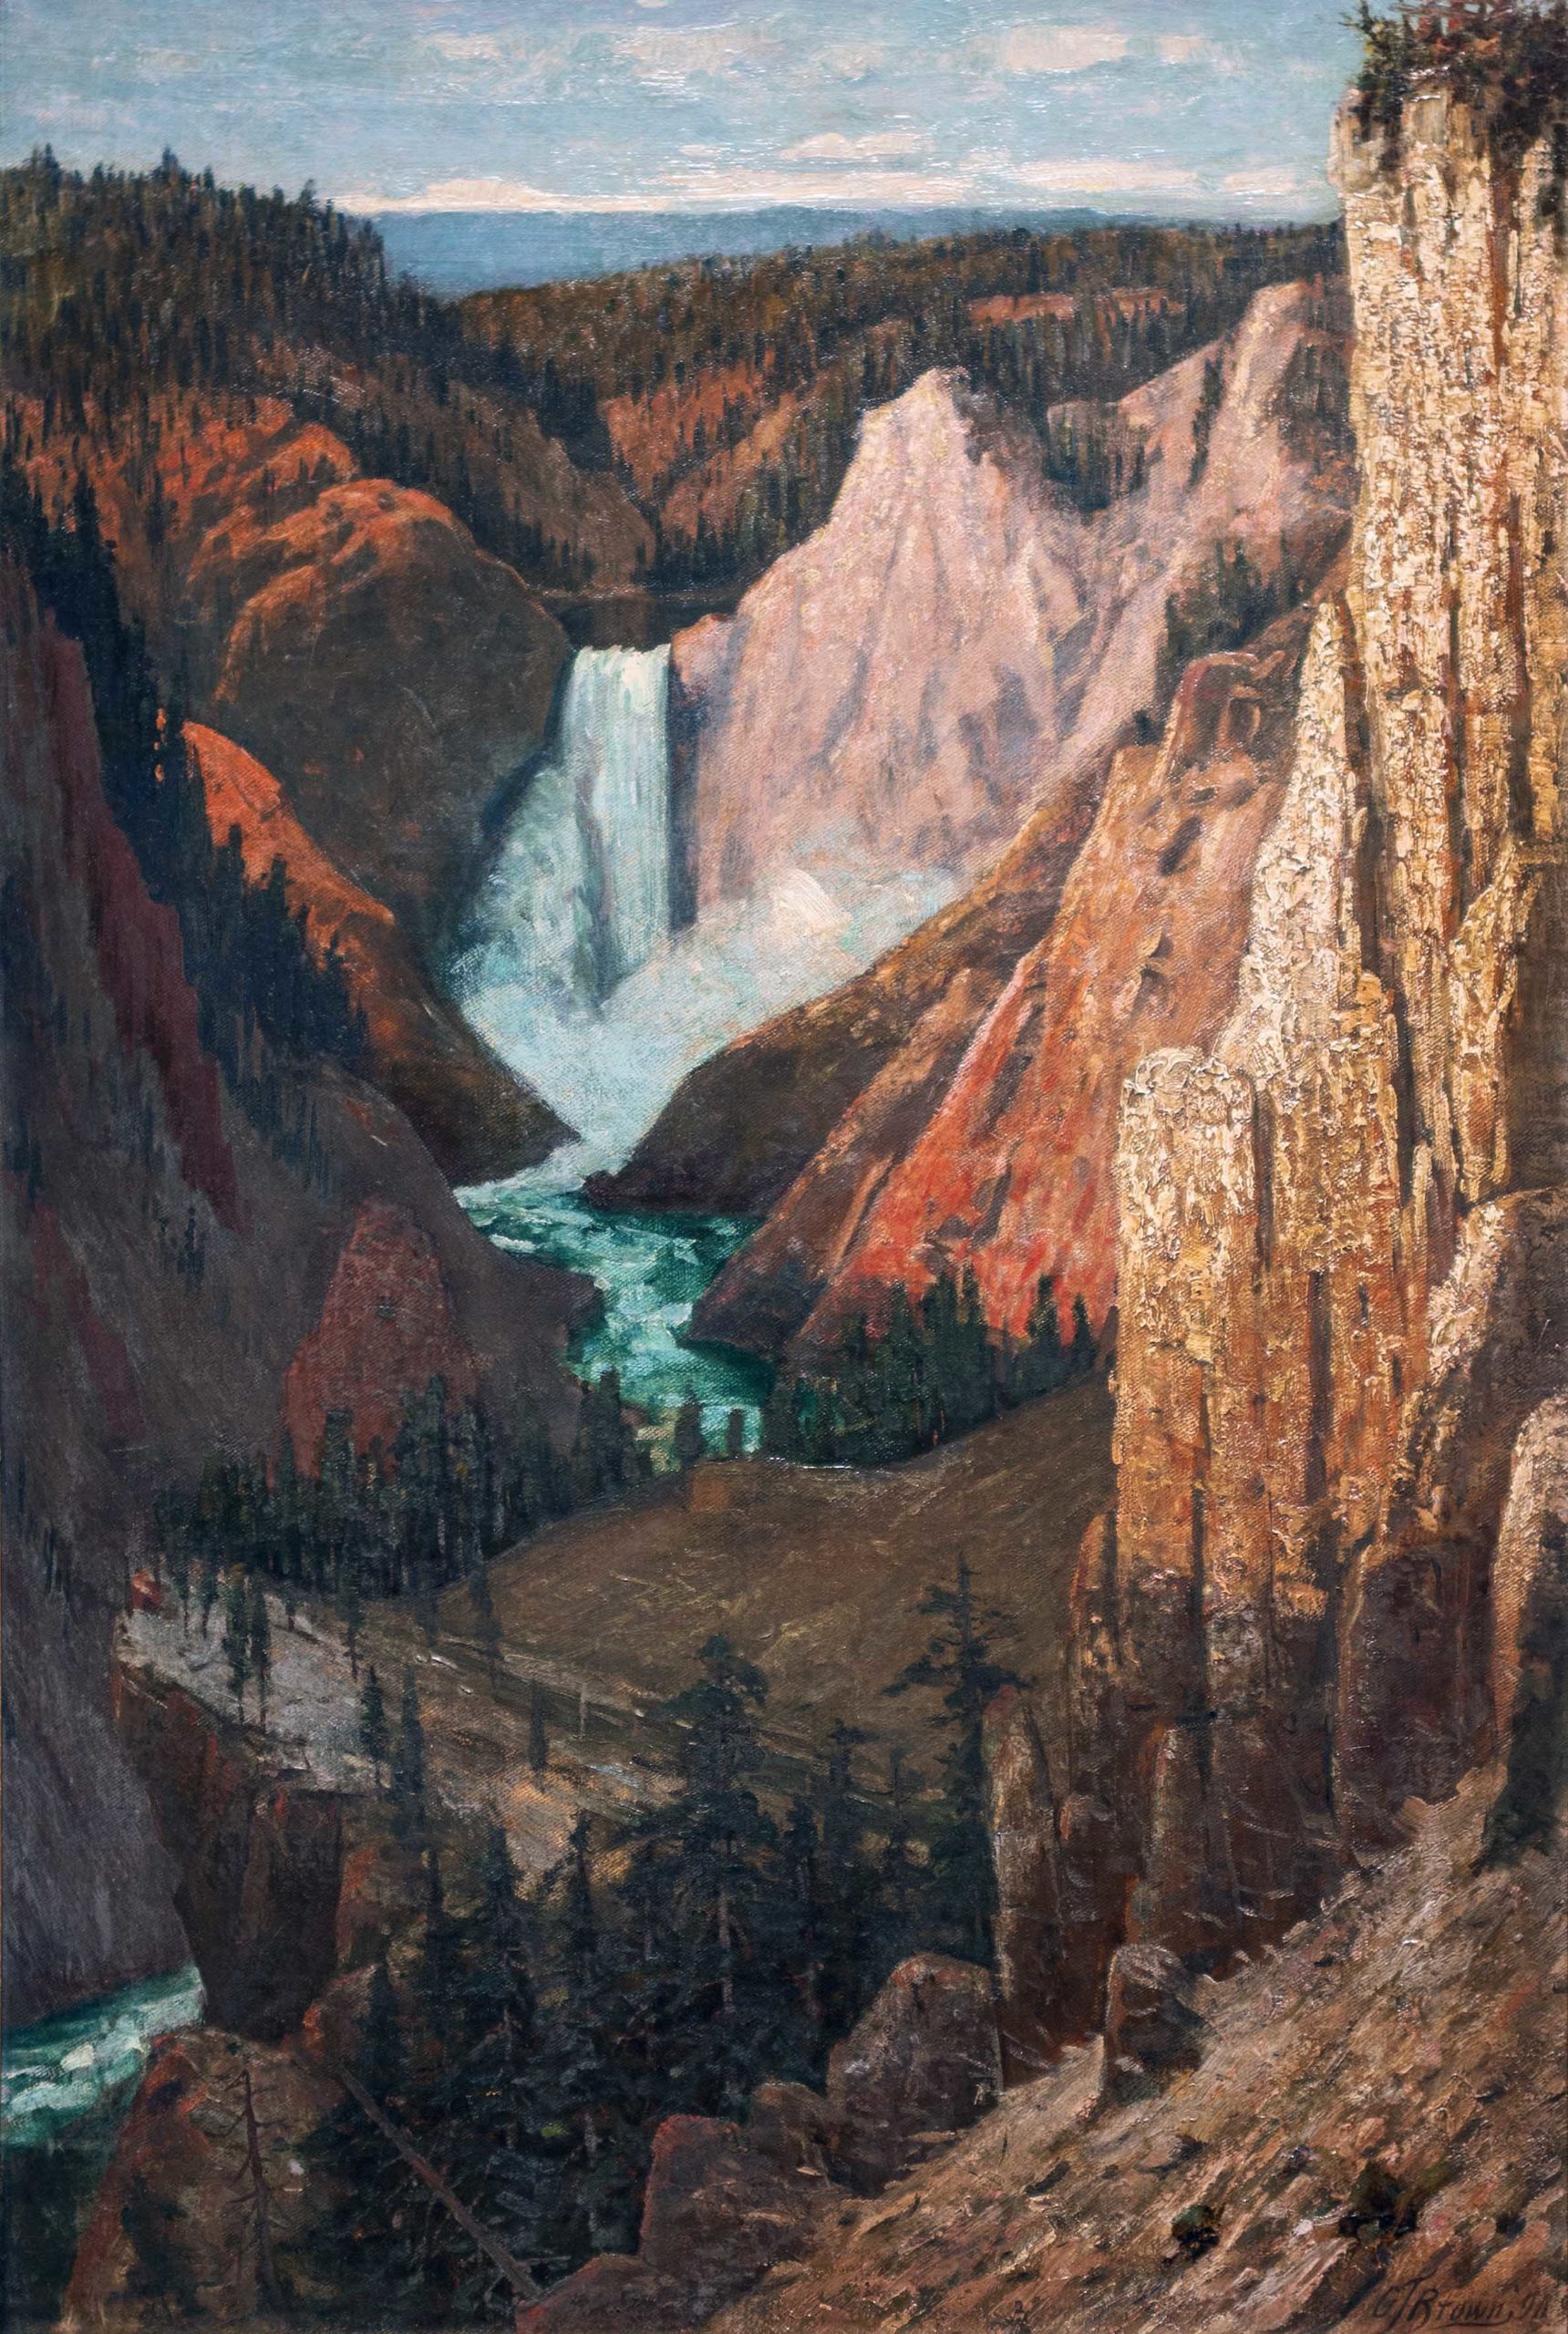 Grafton Tyler Brown, View of the Lower Falls, Grand Canyon of the Yellowstone, 1890, oil on canvas, 76.9 x 51.2 cm (Smithsonian American Art Museum)